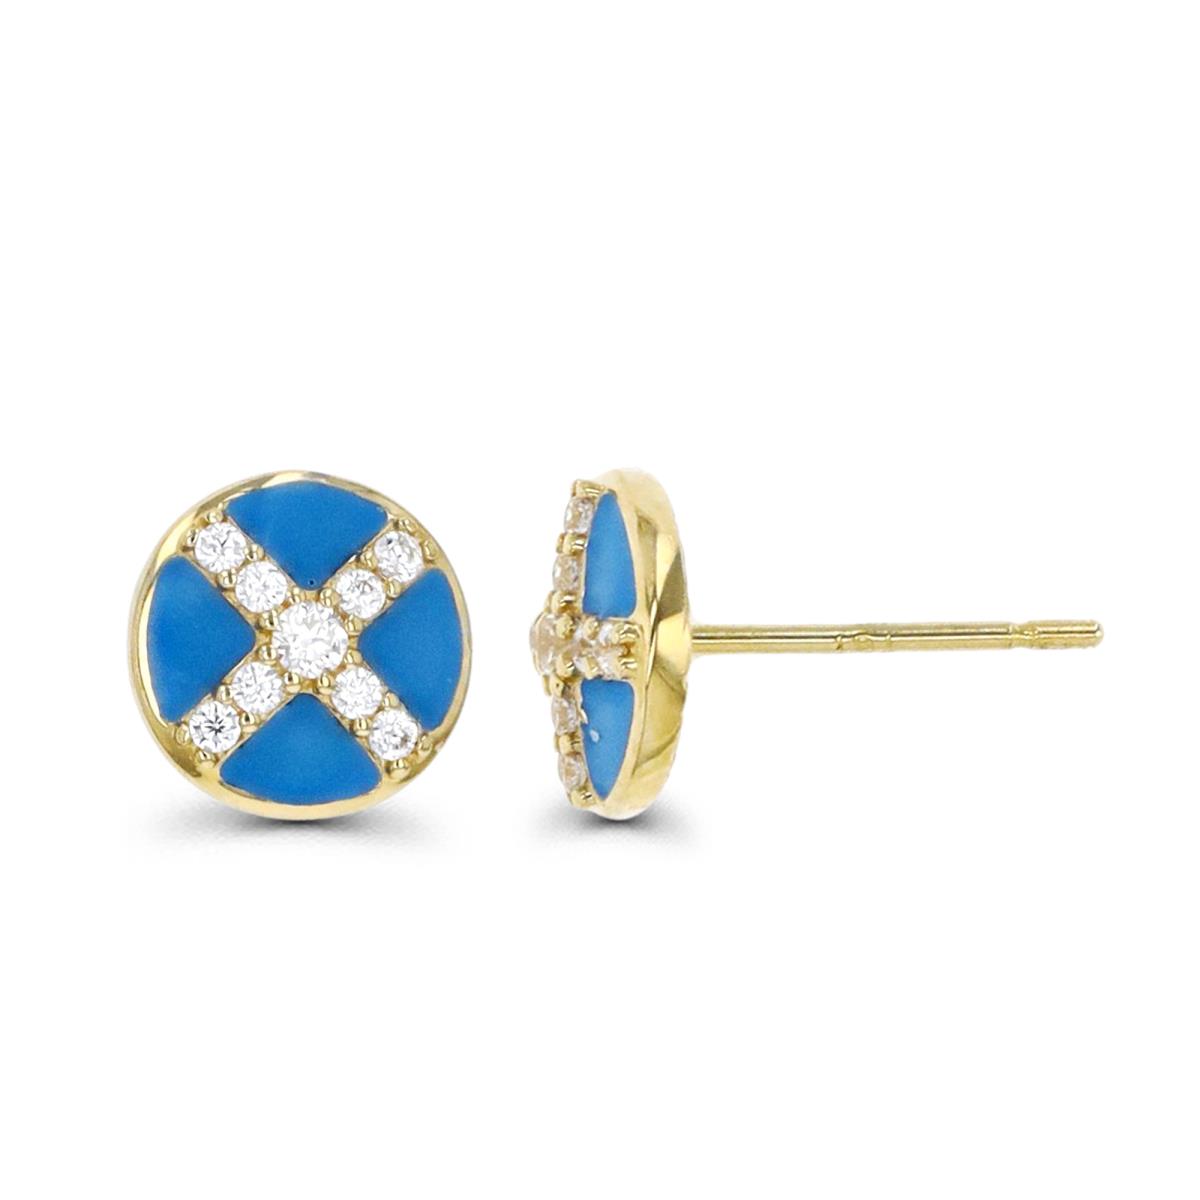 10K Gold Yellow & White CZ and Ligt Blue Enamel 7.0MM Stud Earring